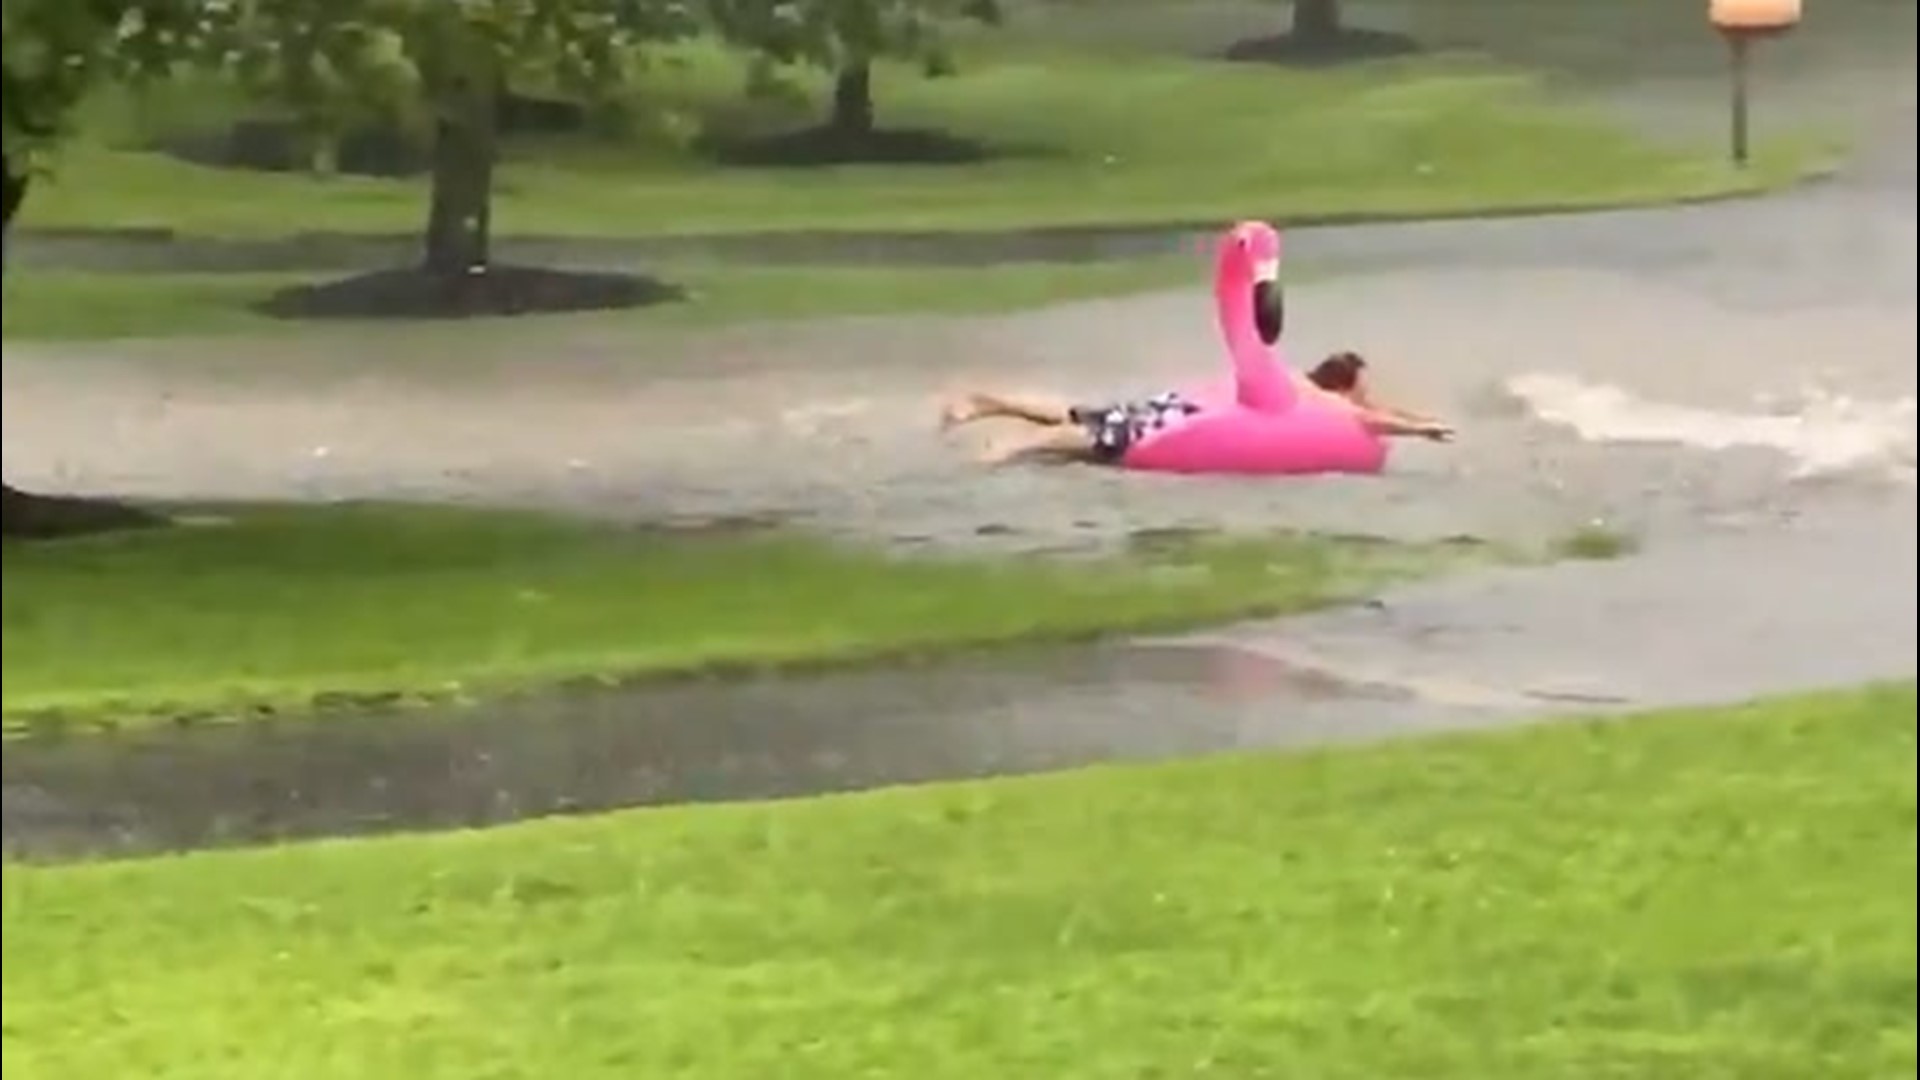 A man in Woolwich Township, New Jersey, decided to make the best of bad situation on Aug. 7 by riding his flamingo float down the flooded street.